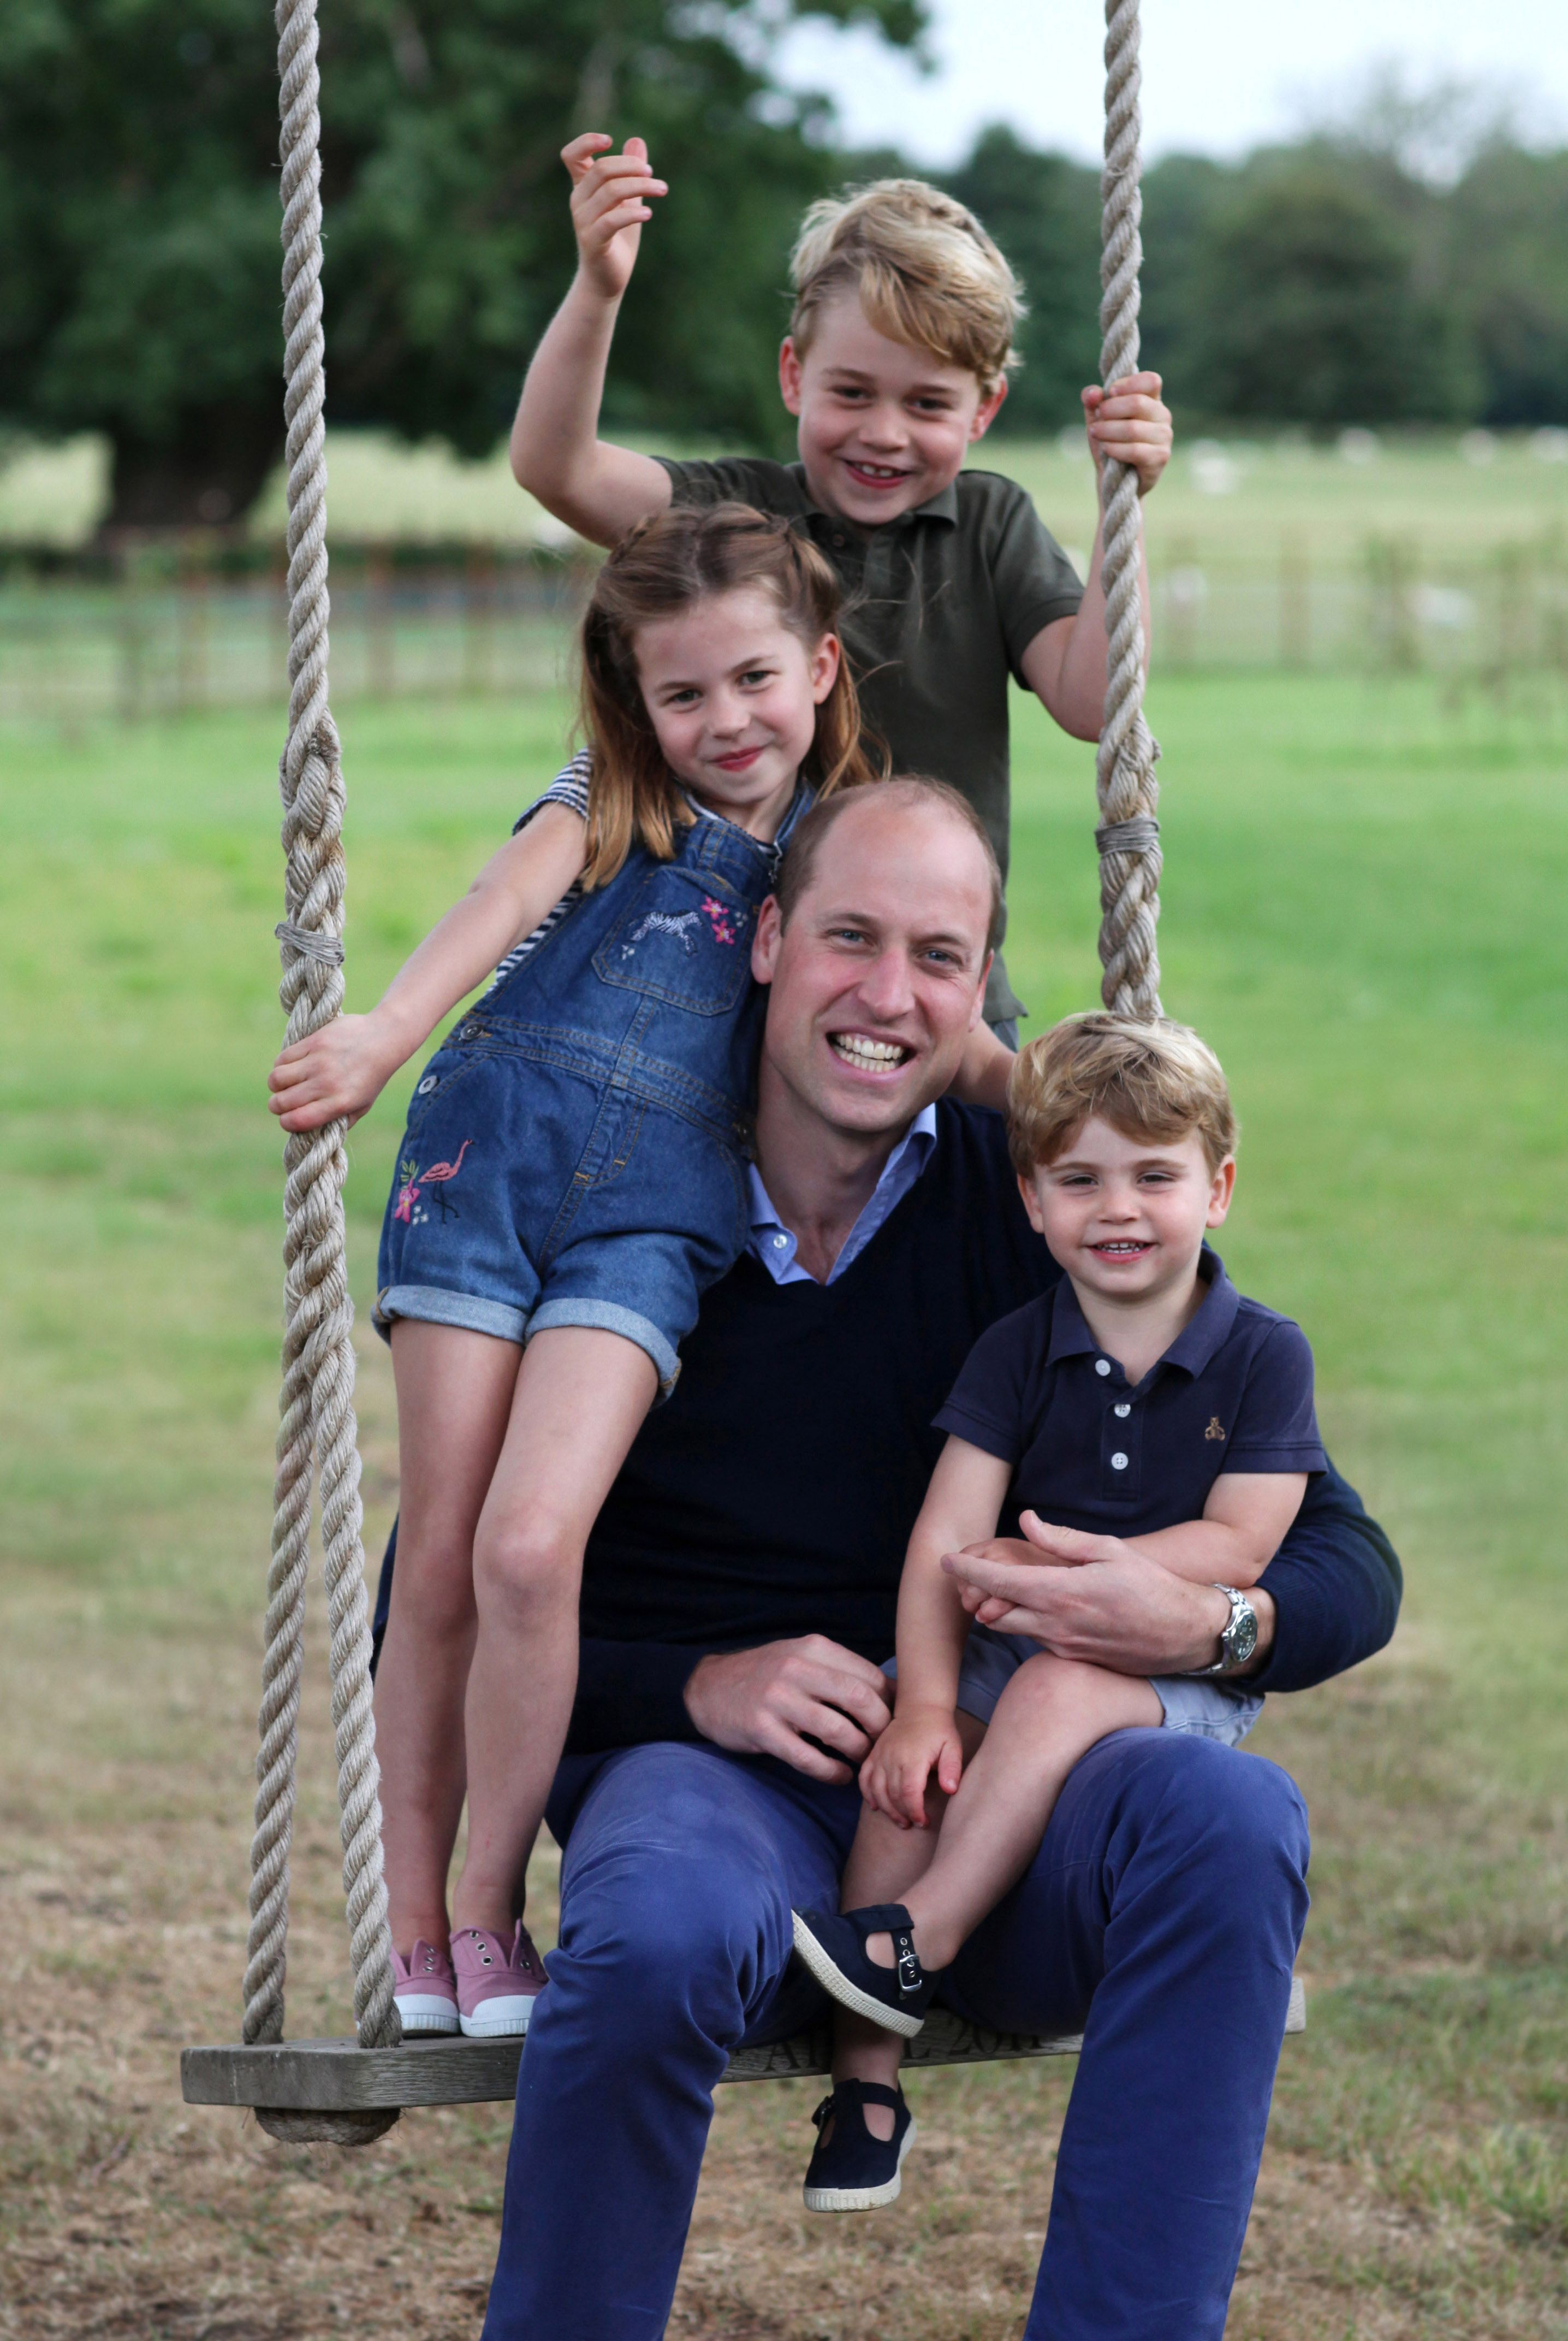 Prince William on a swing with Prince George, Princess Charlotte, and Prince Louis to mark both his birthday and Fathers Day on June 20, 2020, at Kensington Palace | Photo: Duchess Kate/Kensington Palace/Getty Images